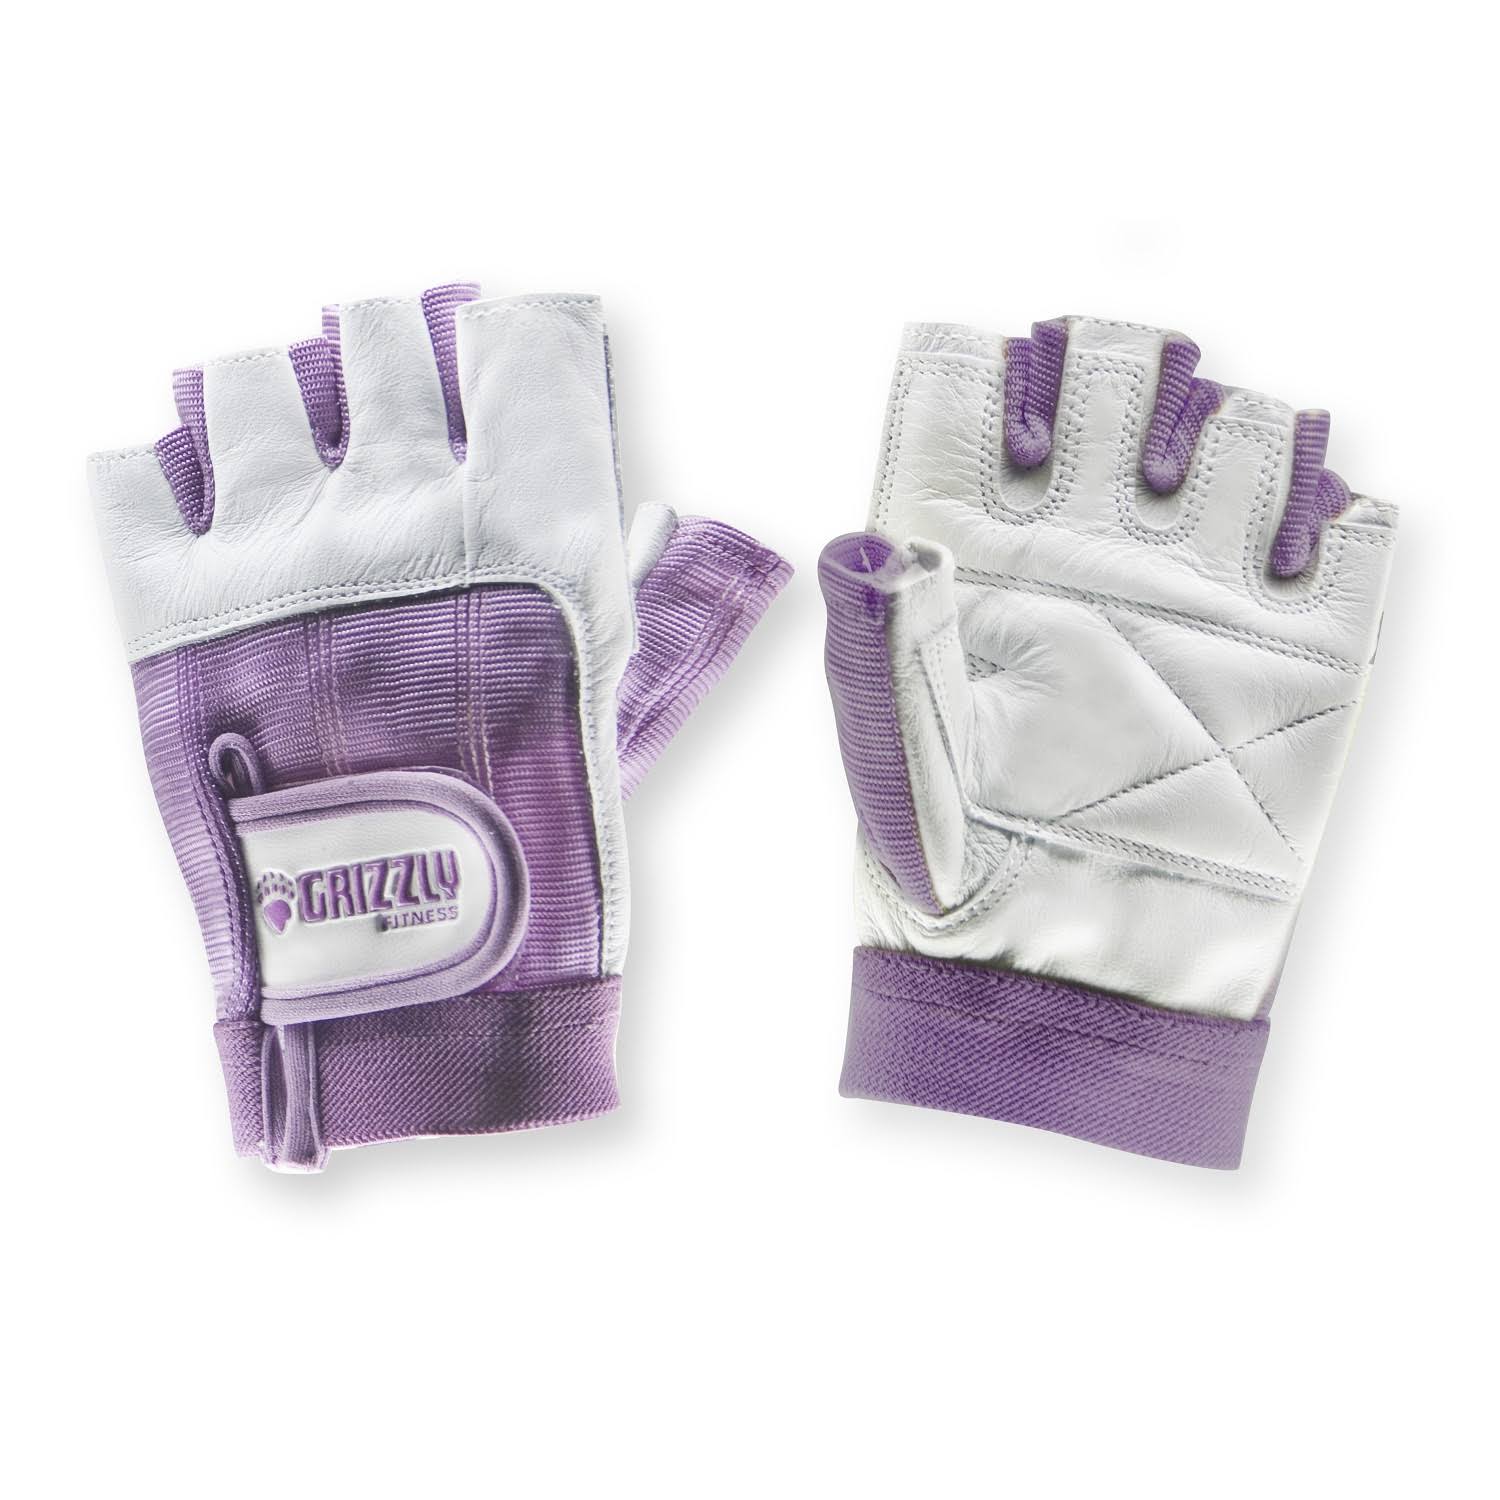 Grizzly Fitness Womens Paw Training Gloves - Purple, Medium